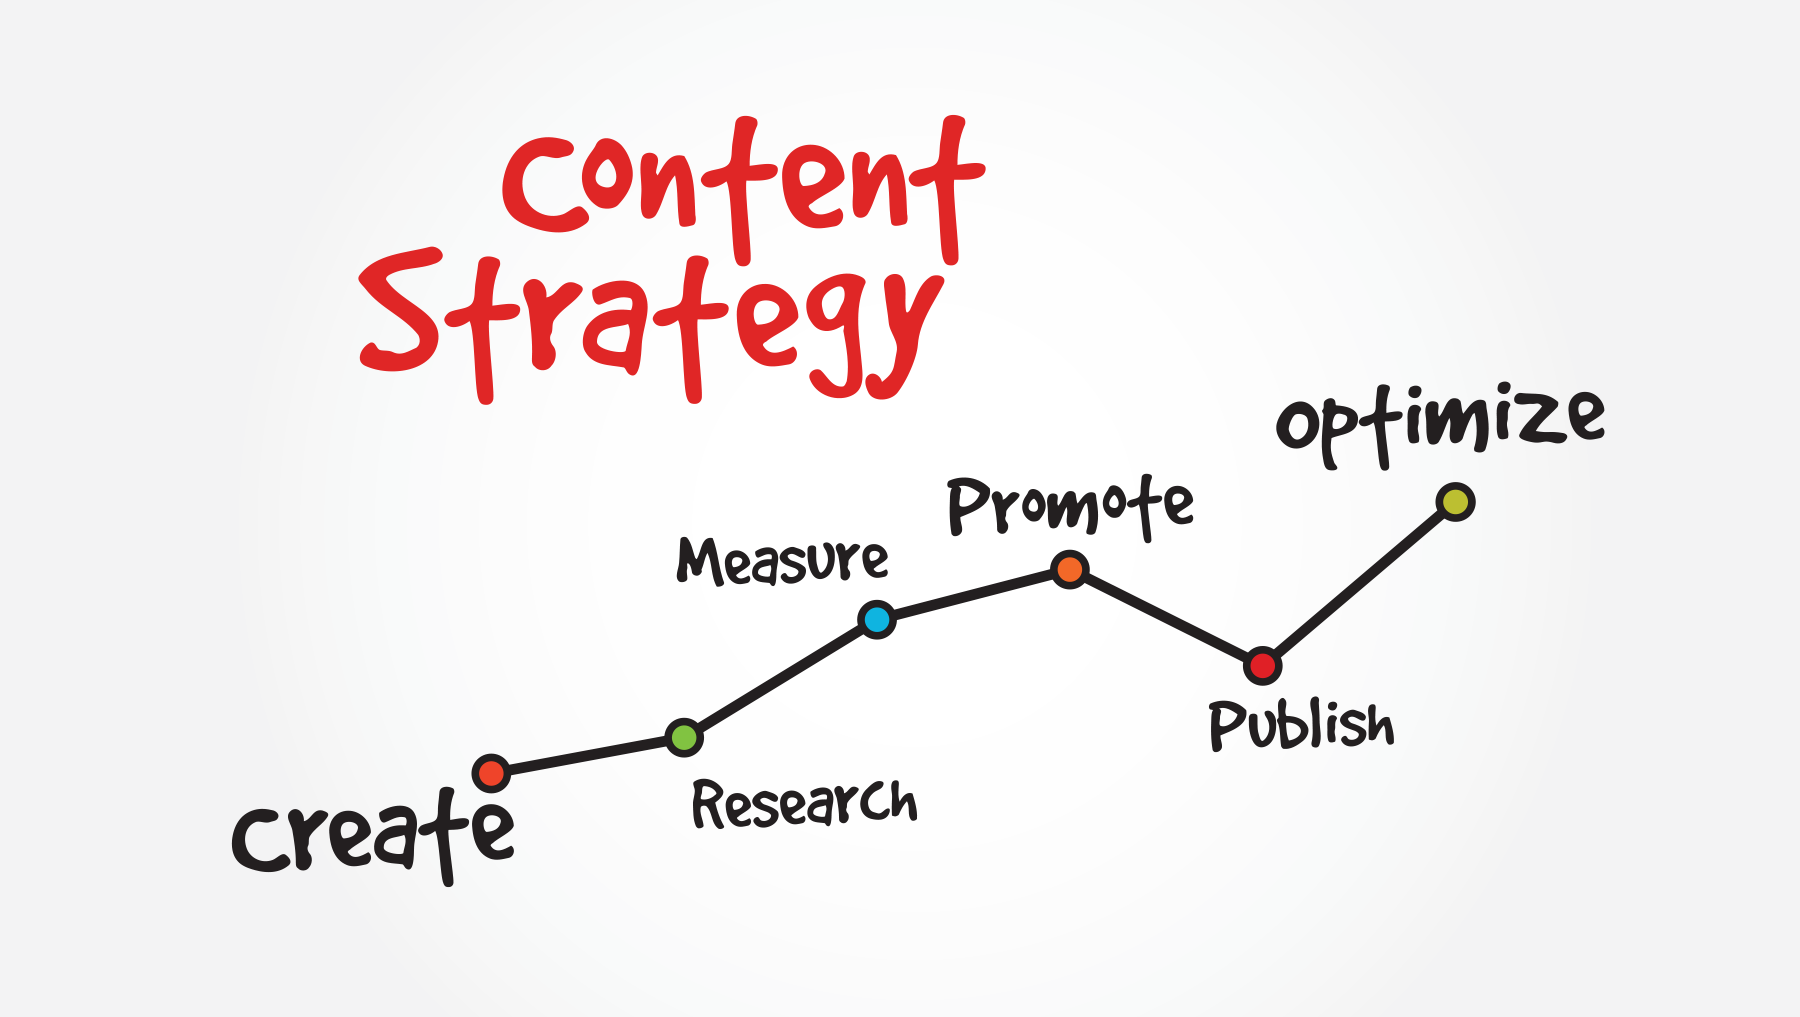 5 Important Things to Remember When Creating High-Quality Content